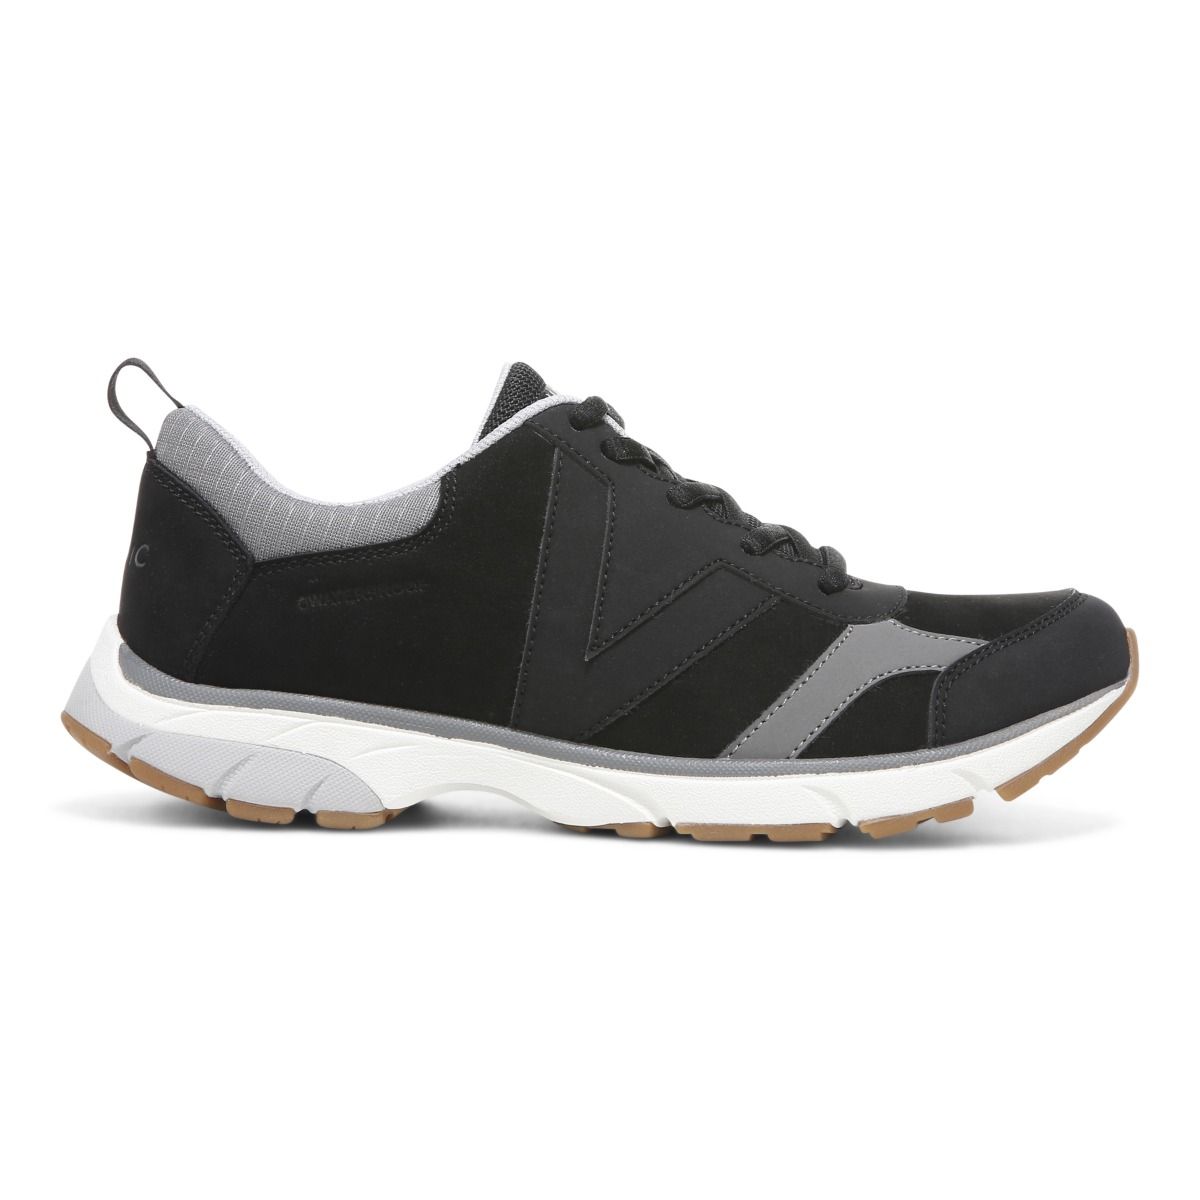 Vionic Zanny Ladies Black & Charcoal Leather & Textile Lace Up Trainers